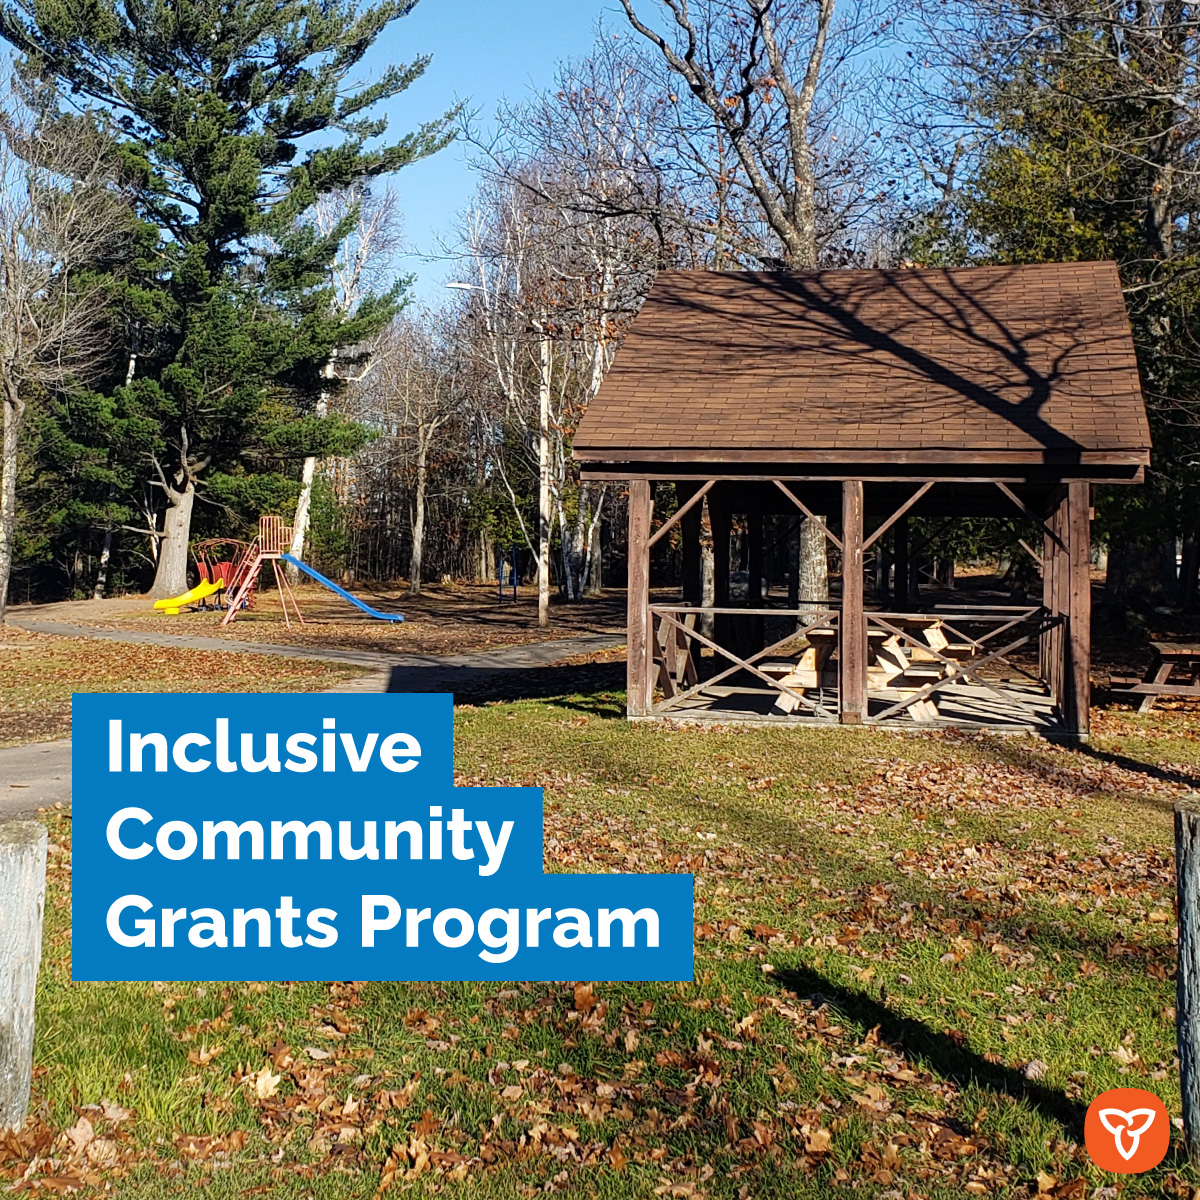 The Inclusive Community Grants Program is now accepting applications! Apply by May 22 if you have a project that makes your community more #accessible and helps people of all ages and abilities stay active! Learn more: news.ontario.ca/en/release/100… #OakvilleNorth-#BurlON